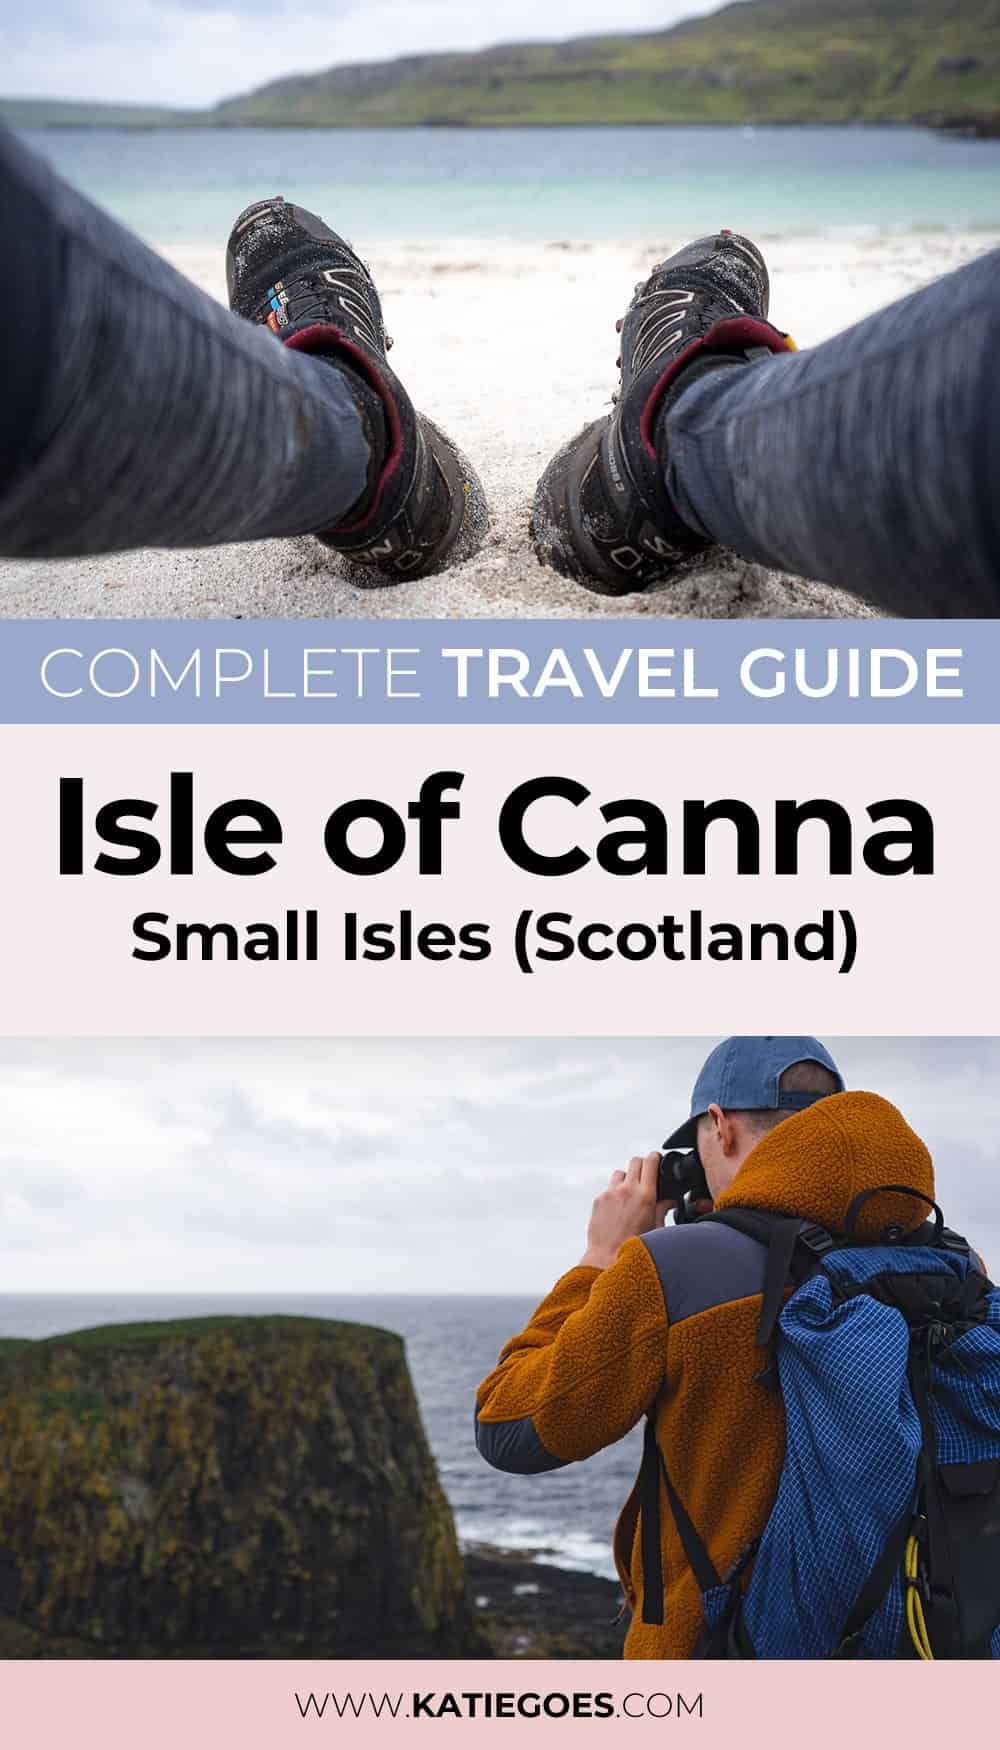 Complete Travel Guide to the Isle of Canna in the Small Isles (Scotland)